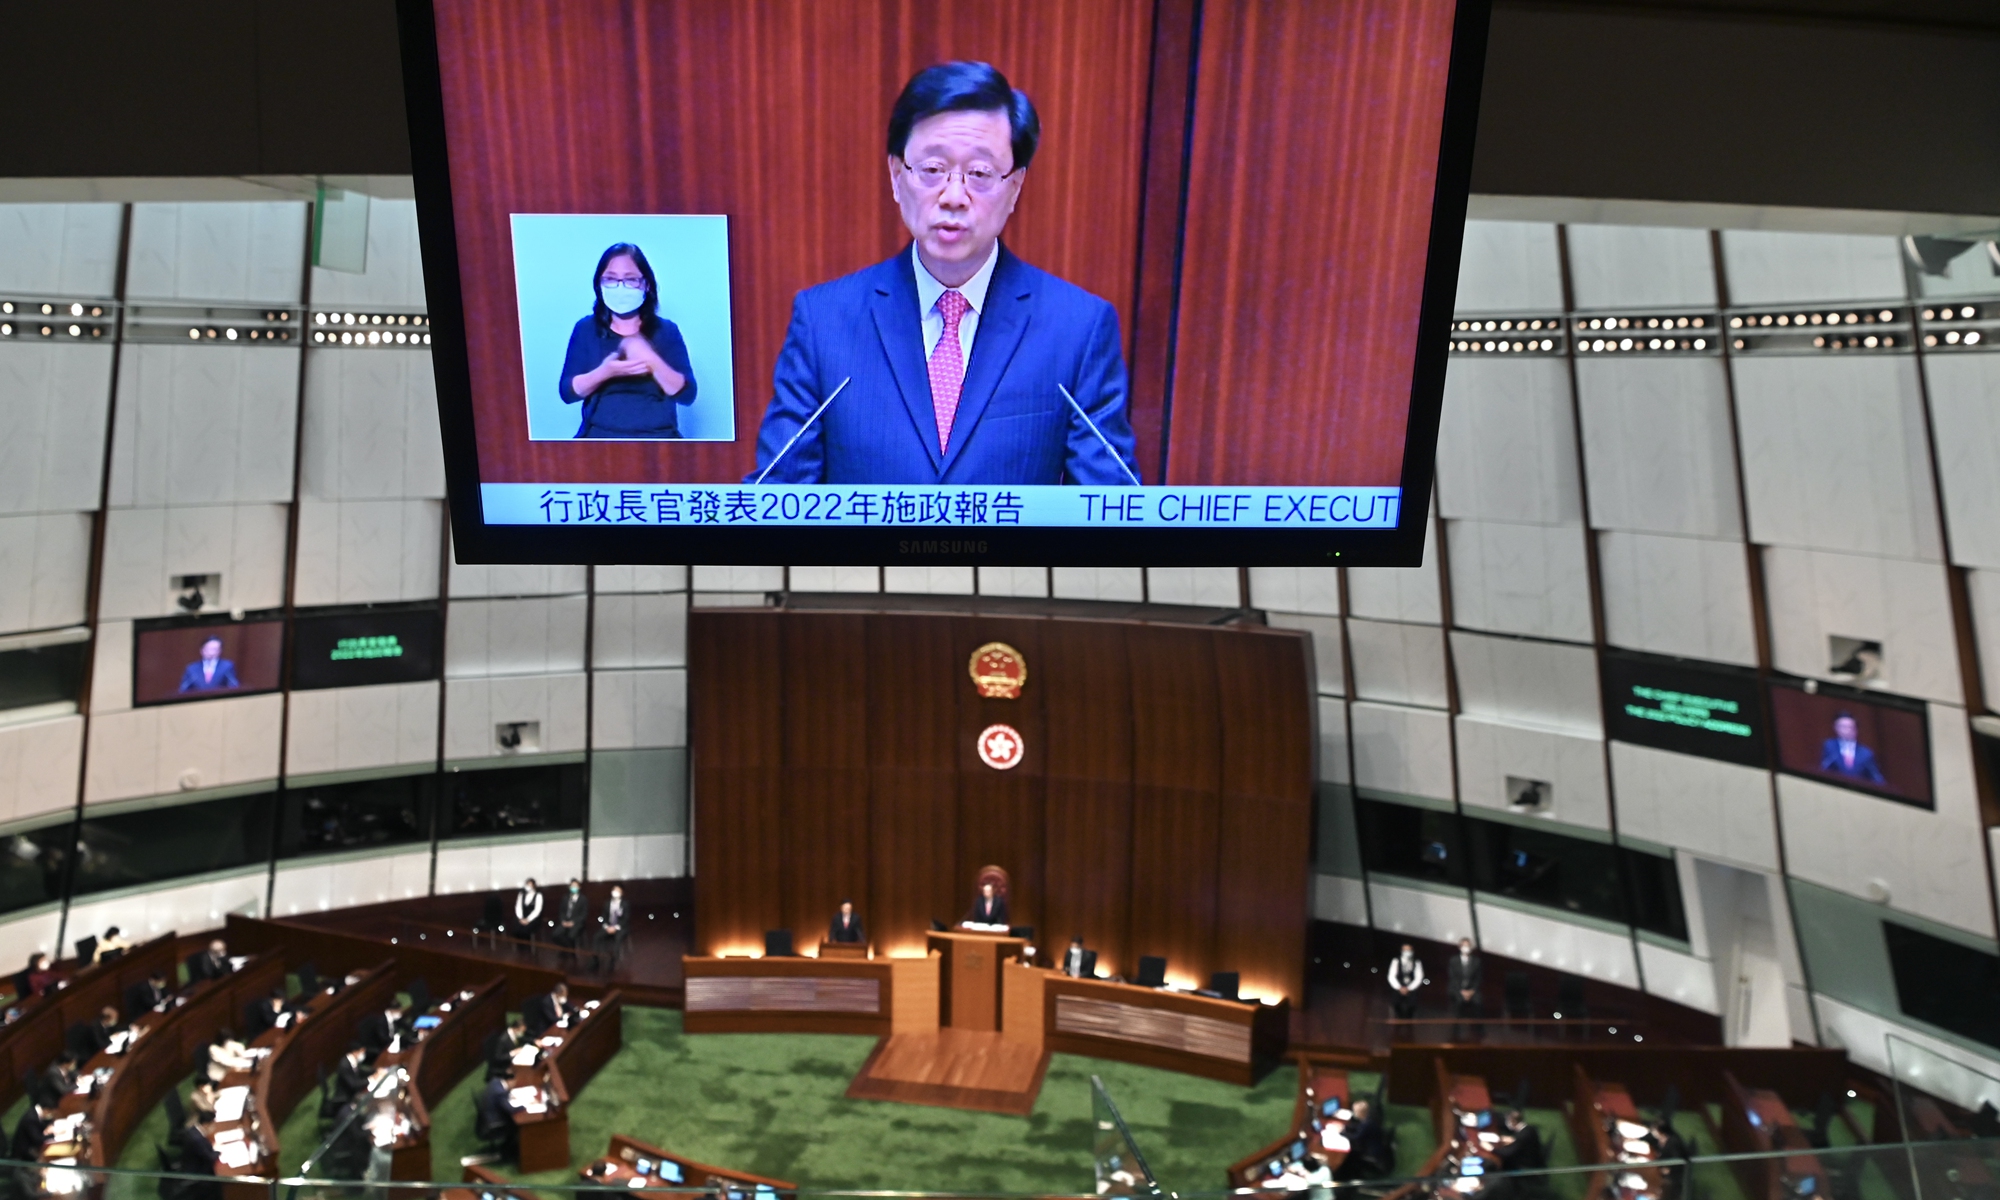 Hong Kong's Chief Executive John Lee delivers his first policy address on October 19, 2022, highlighting the need to improve local governance, enhance the city's competitiveness as an international business hub. Photo: VCG